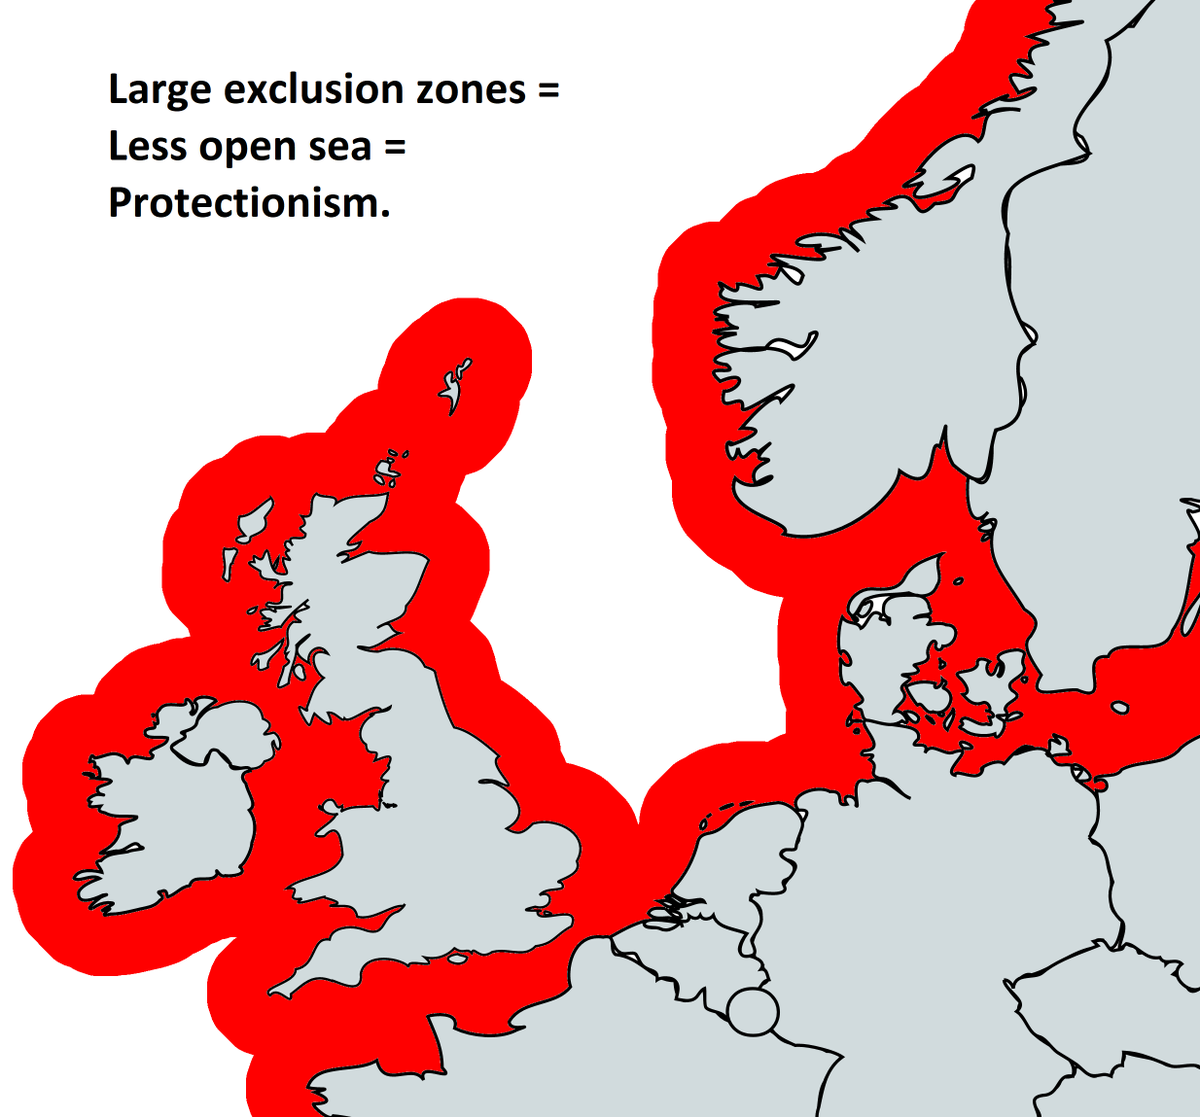 2. Fishing limits are a protectionist trade off between In-shore fishing deep sea fishing. The bigger the exclusion zone countries set for in-shore fishing, the more deep sea fishing is impacted.